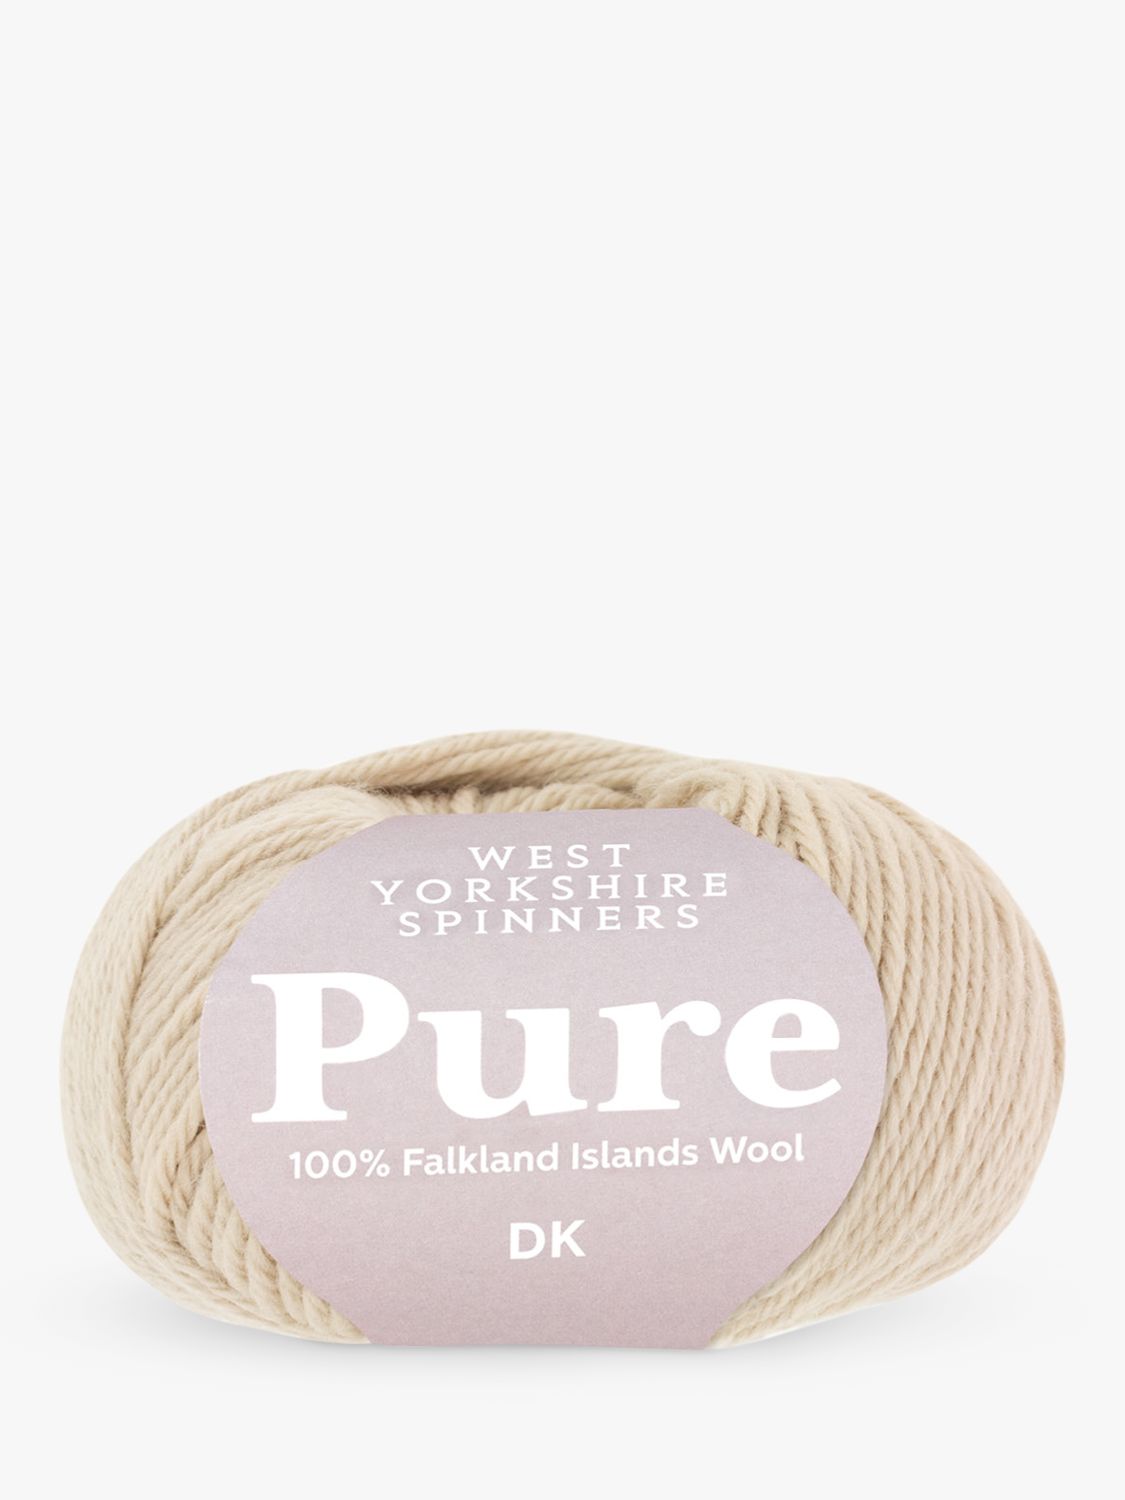 West Yorkshire Spinners Pure DK Yarn, 50g, Sand 208